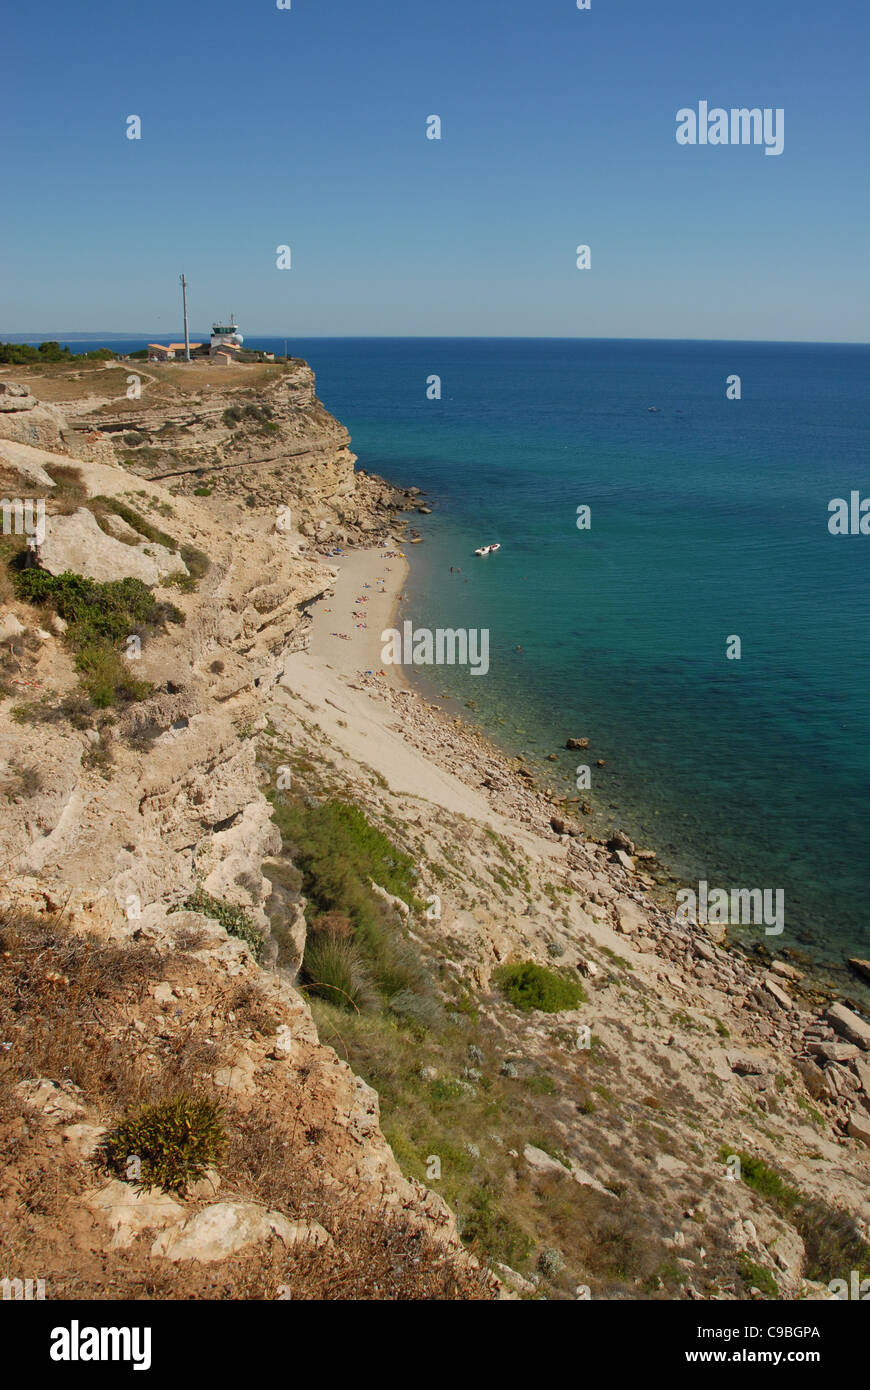 The chalky cliffs of Cap Leucate on the Golfe du Lion of the Mediterranean Sea with lighthouse and rocky sand beach Stock Photo